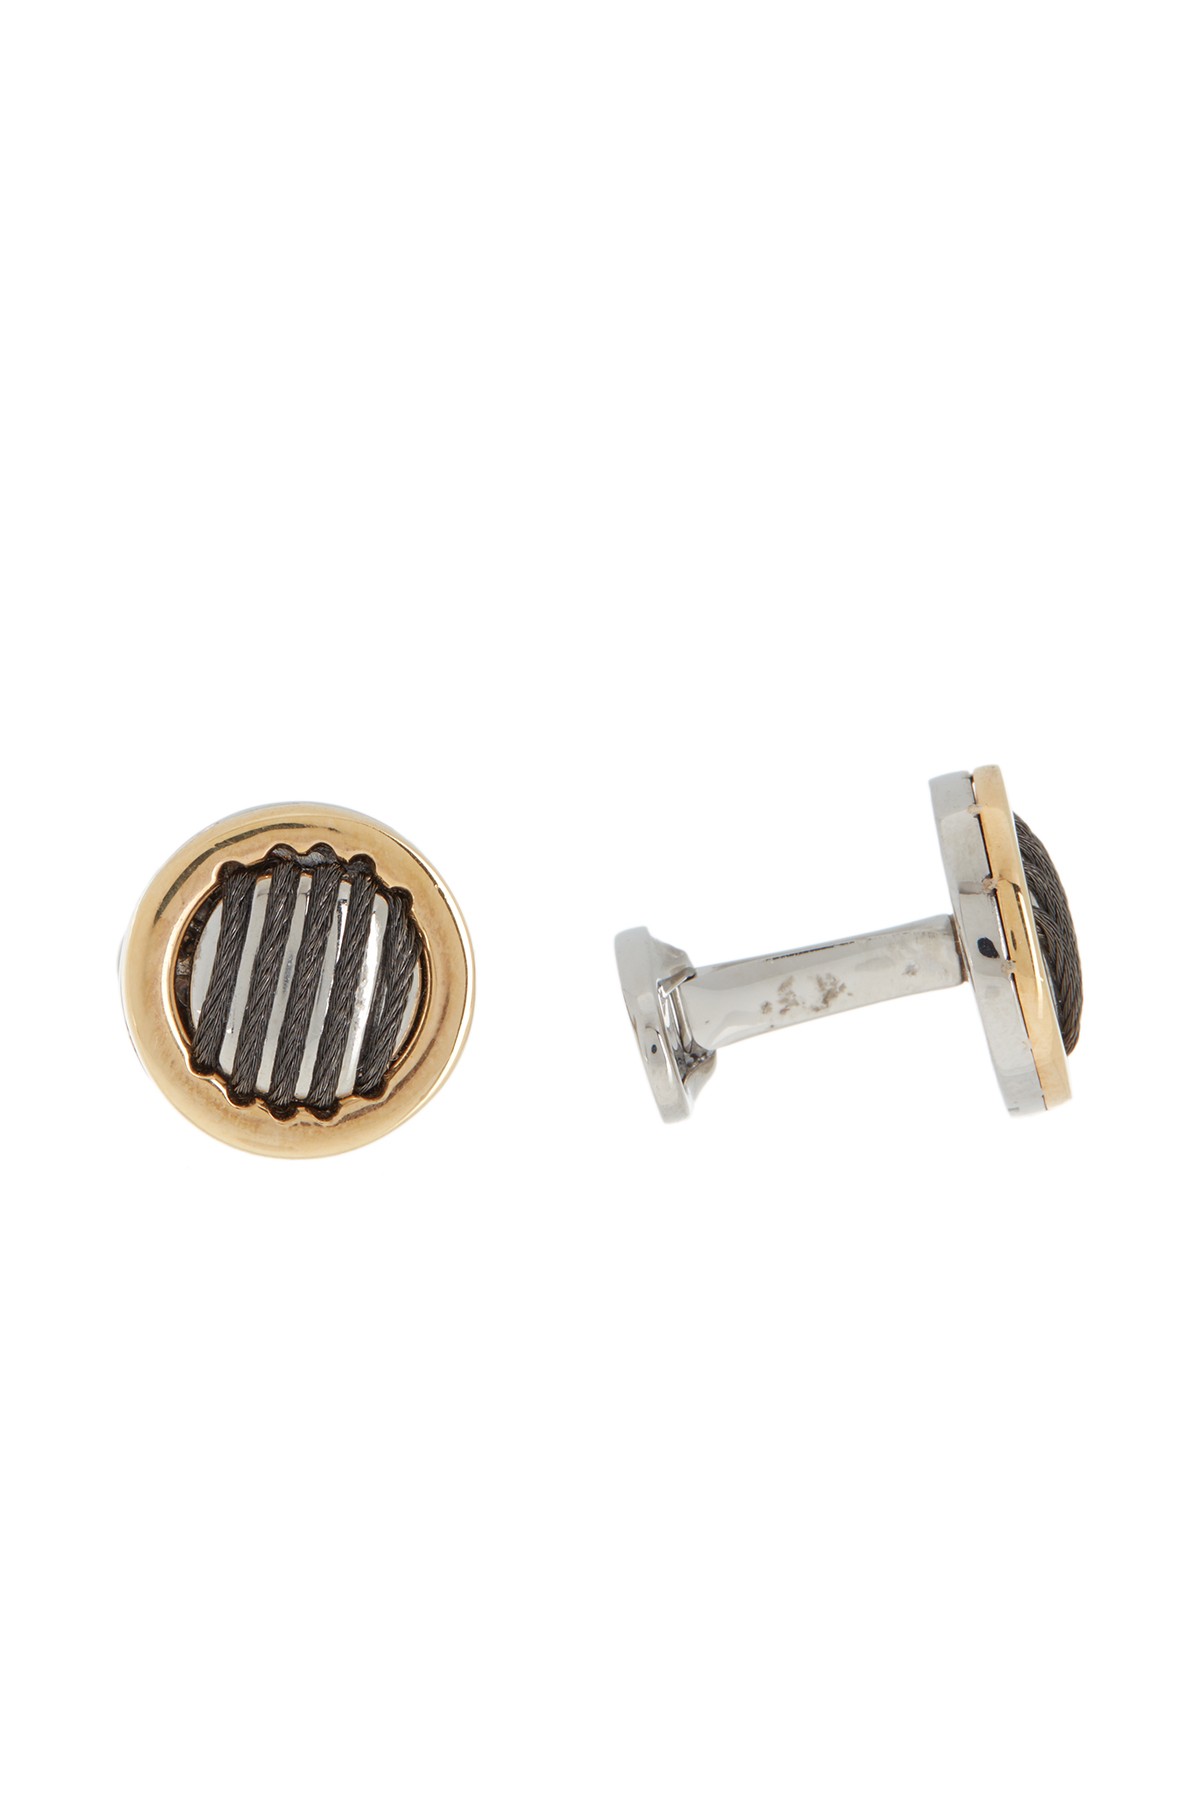 18K Yellow Gold & Stainless Steel Cable Cuff Links ALOR